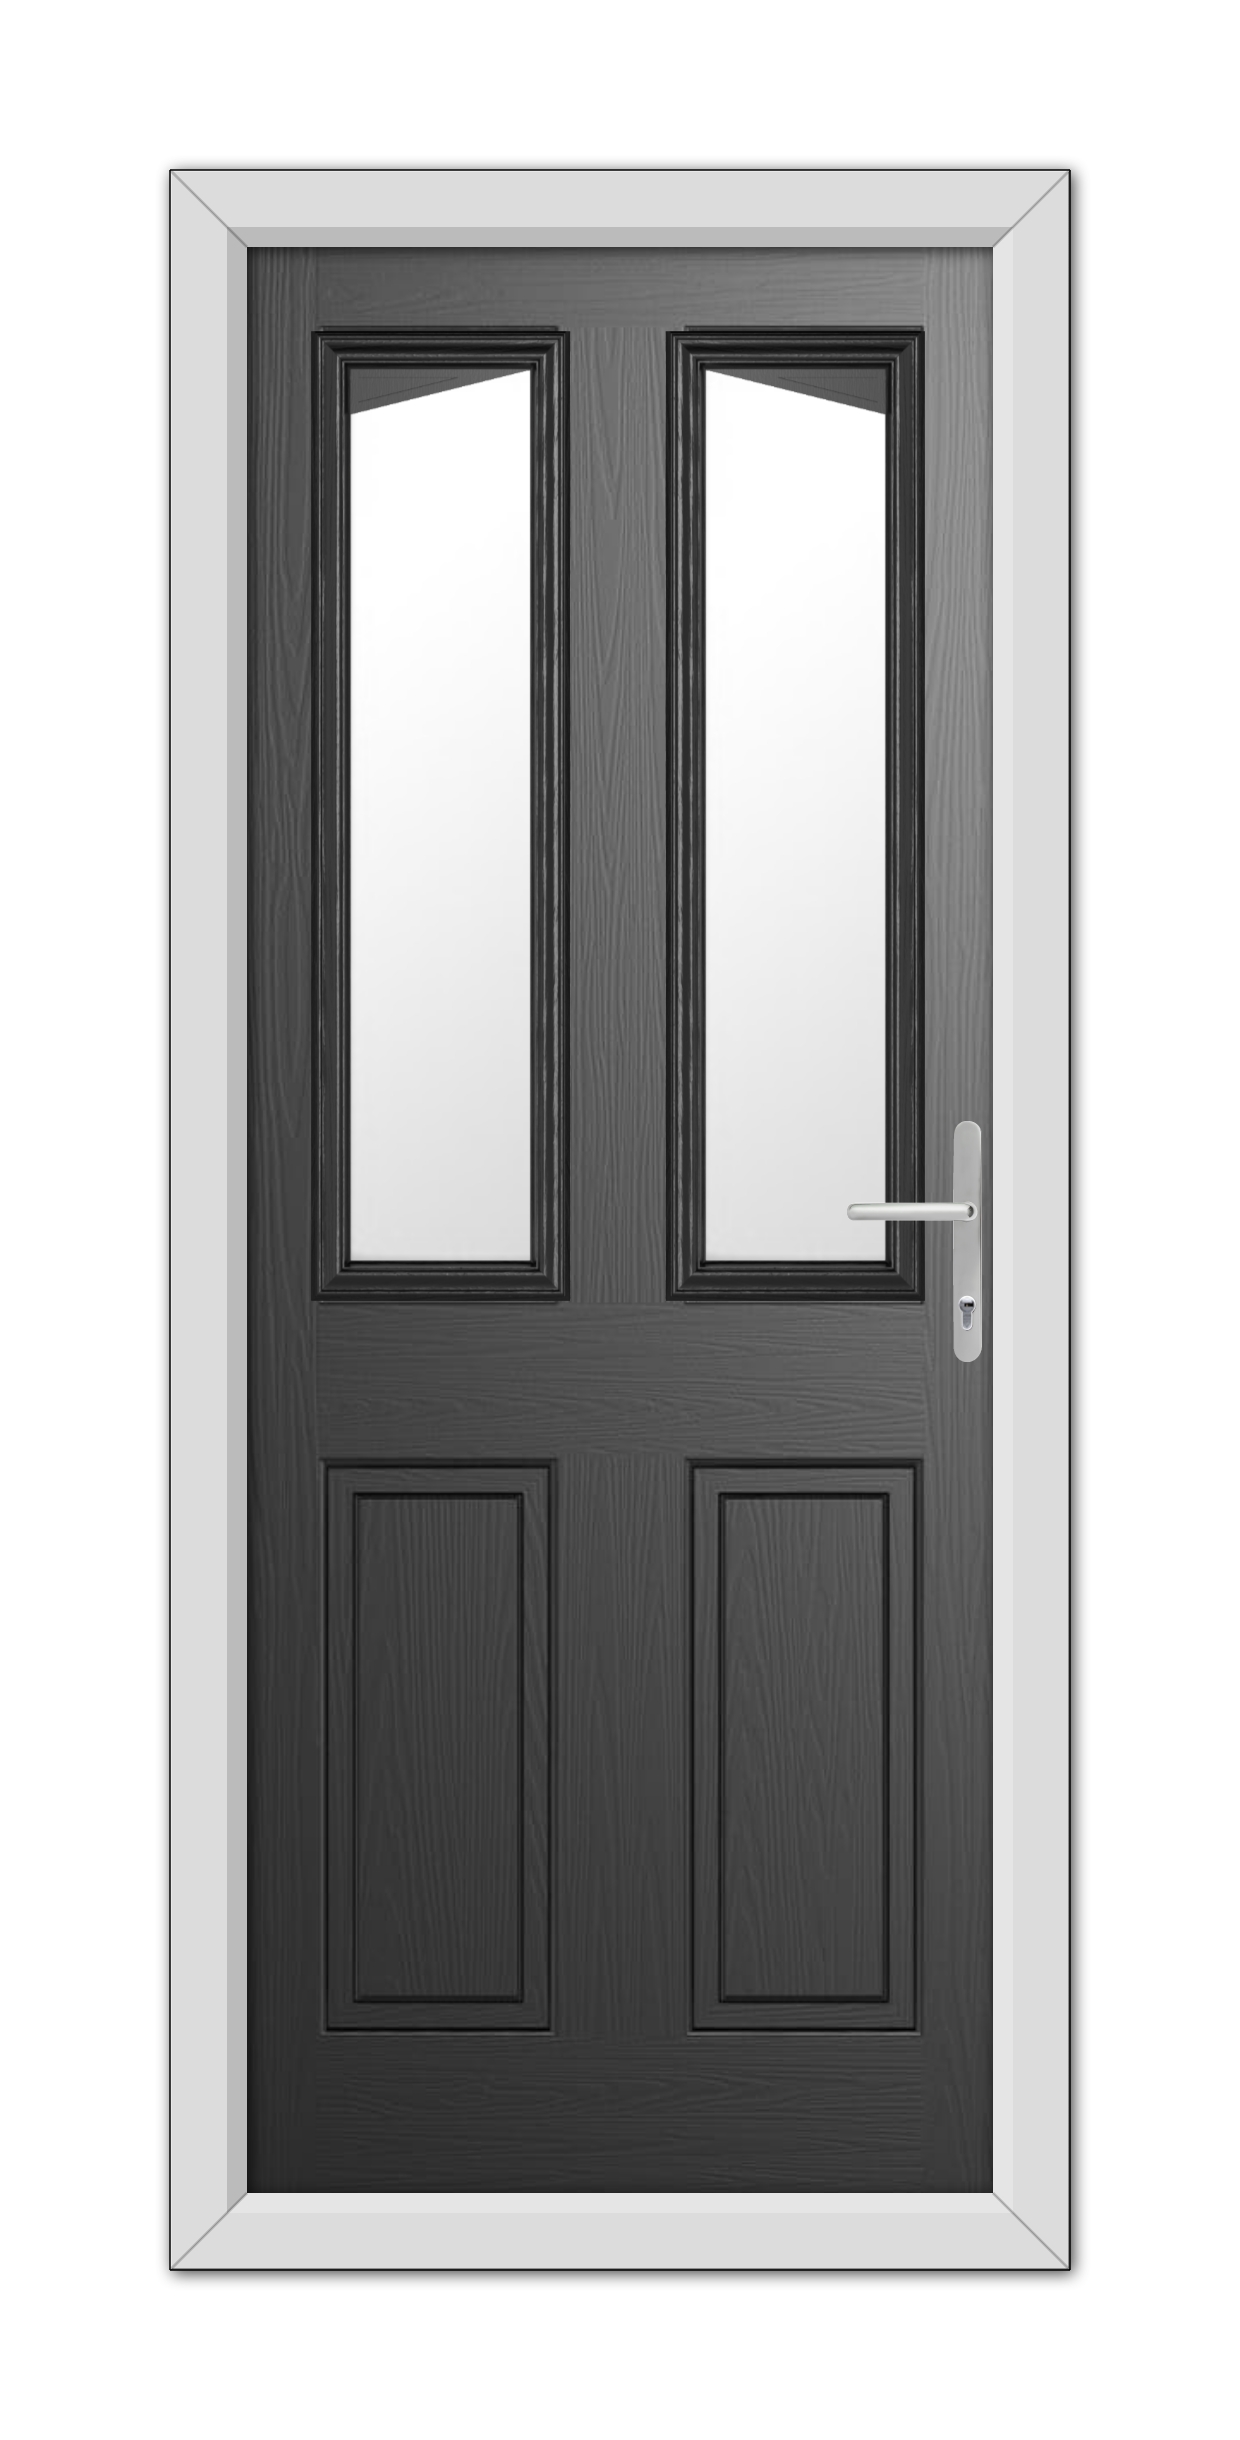 A modern Black Highbury Composite Door 48mm Timber Core with glass panels at the top and solid panels at the bottom, featuring a right-hand side handle.